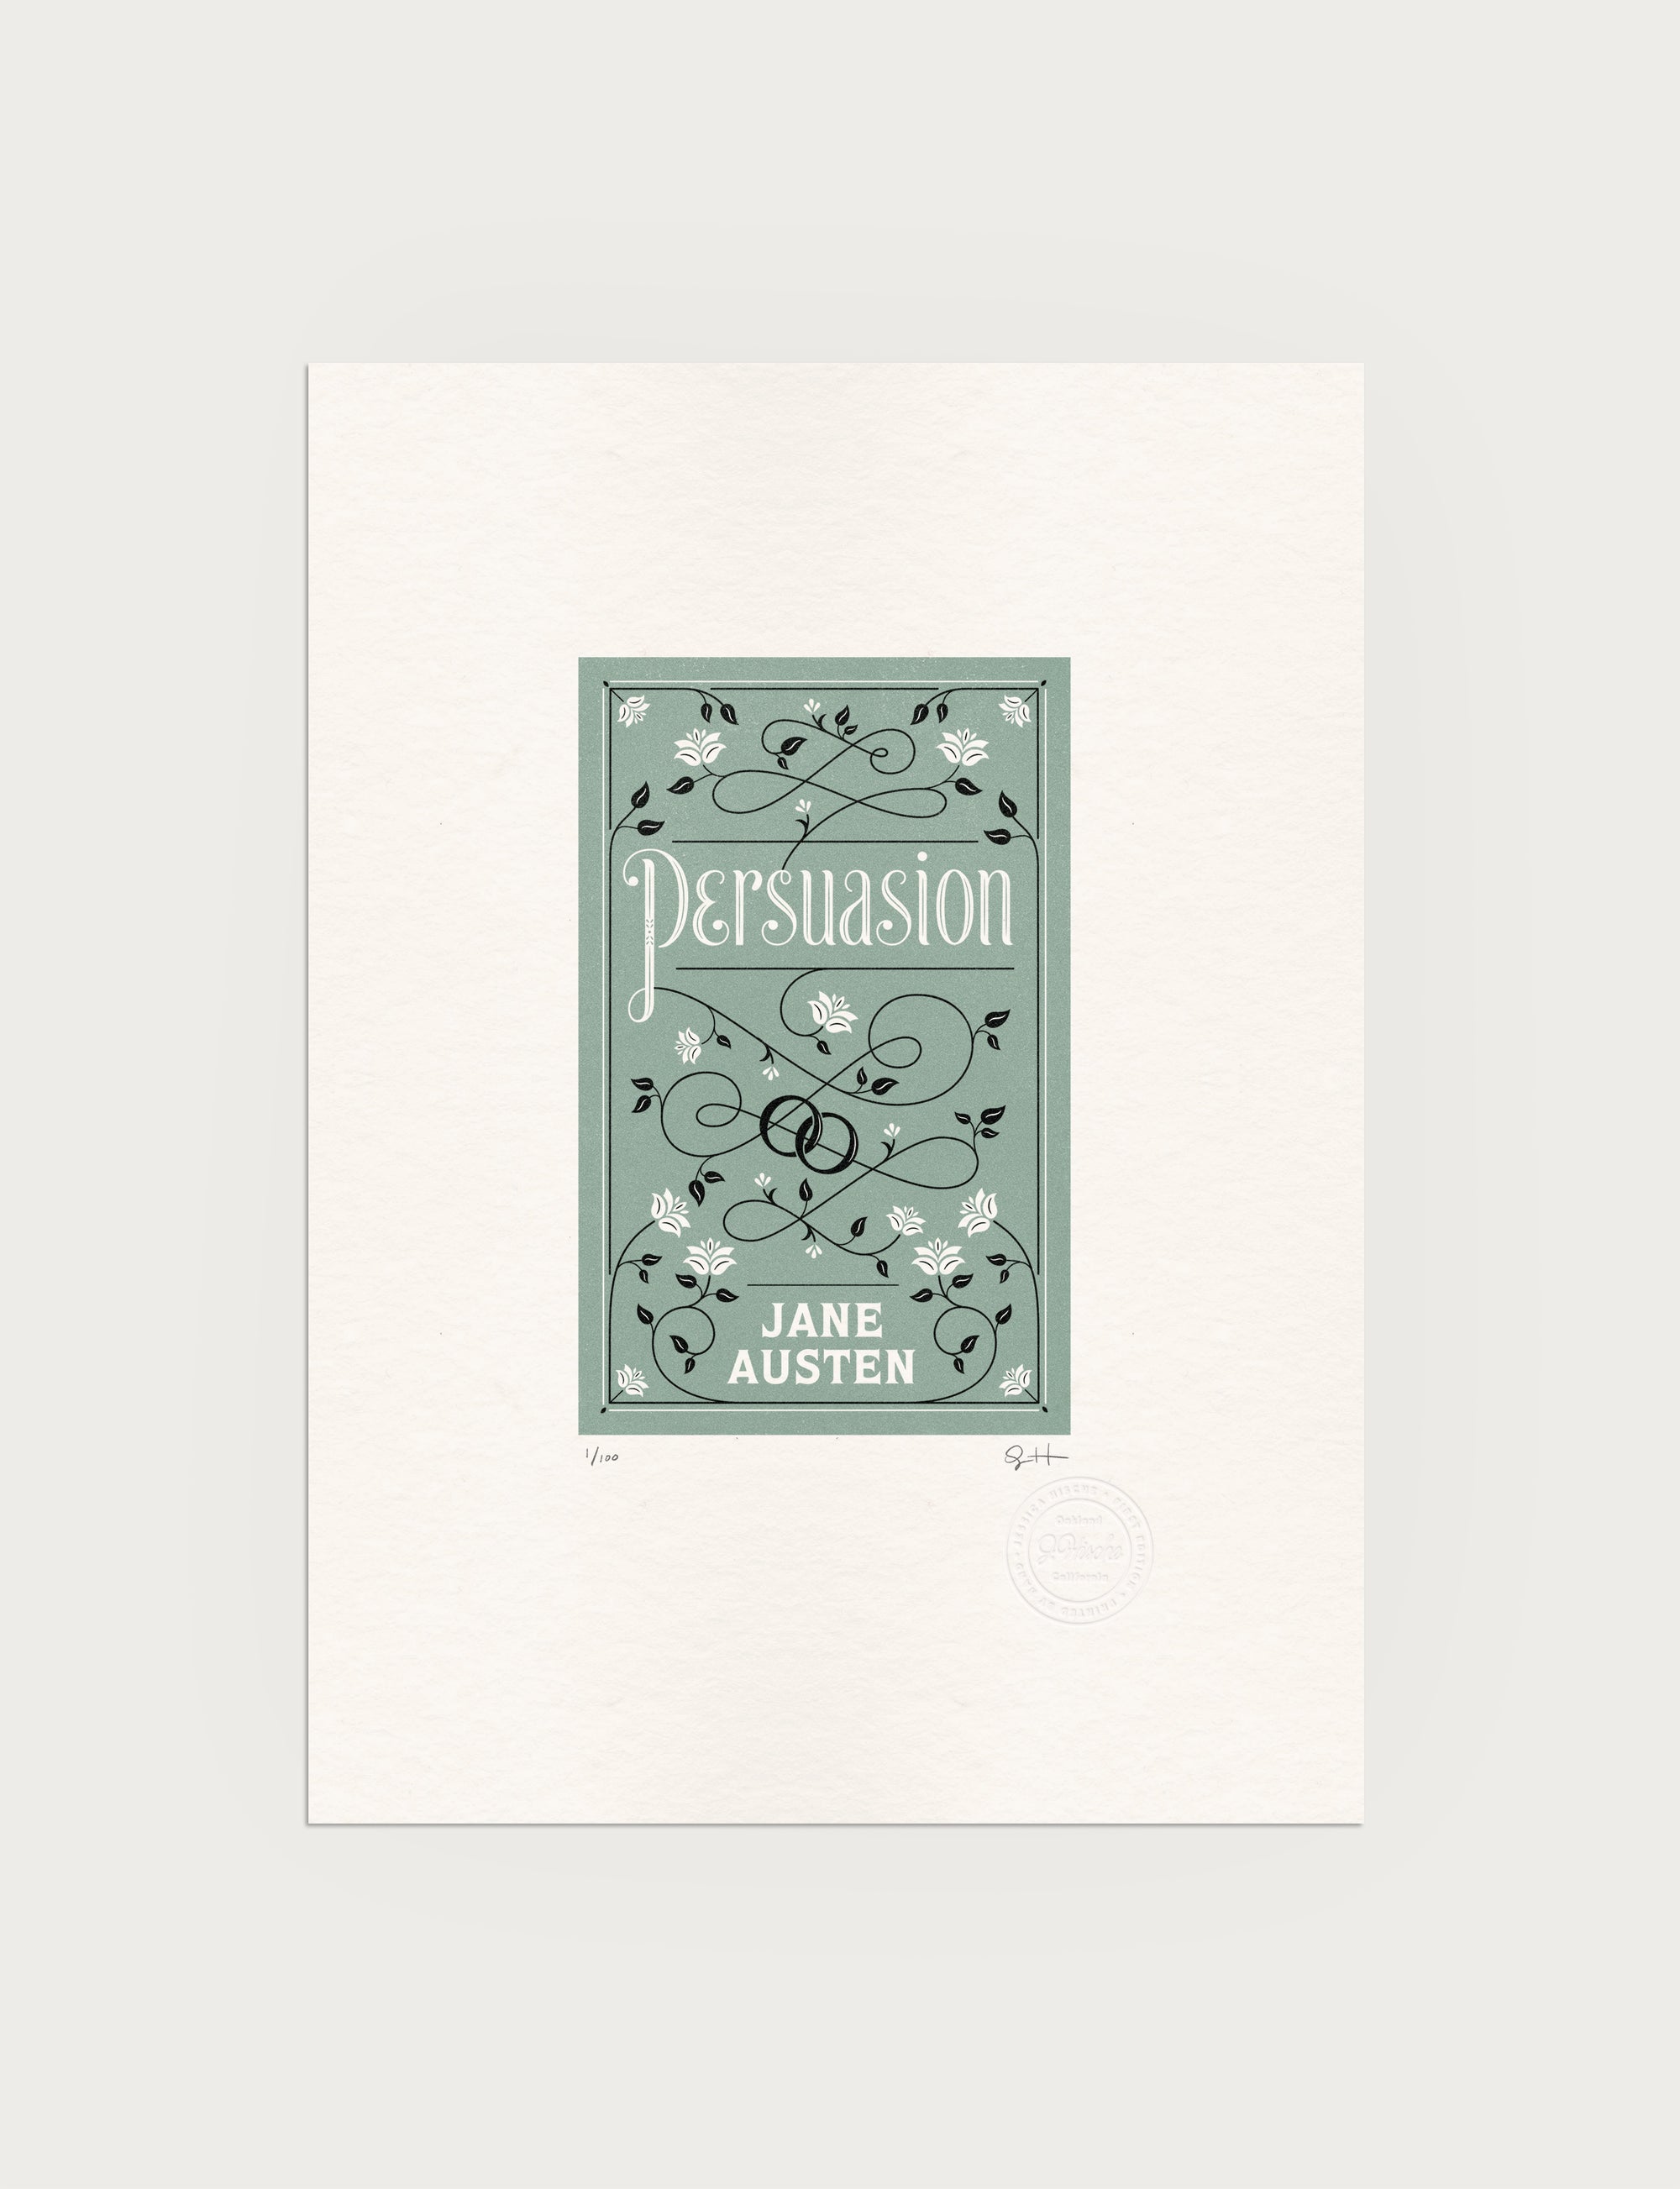 2-color letterpress print in green and black. Printed artwork is an illustrated book cover of Persuasion including custom hand lettering.